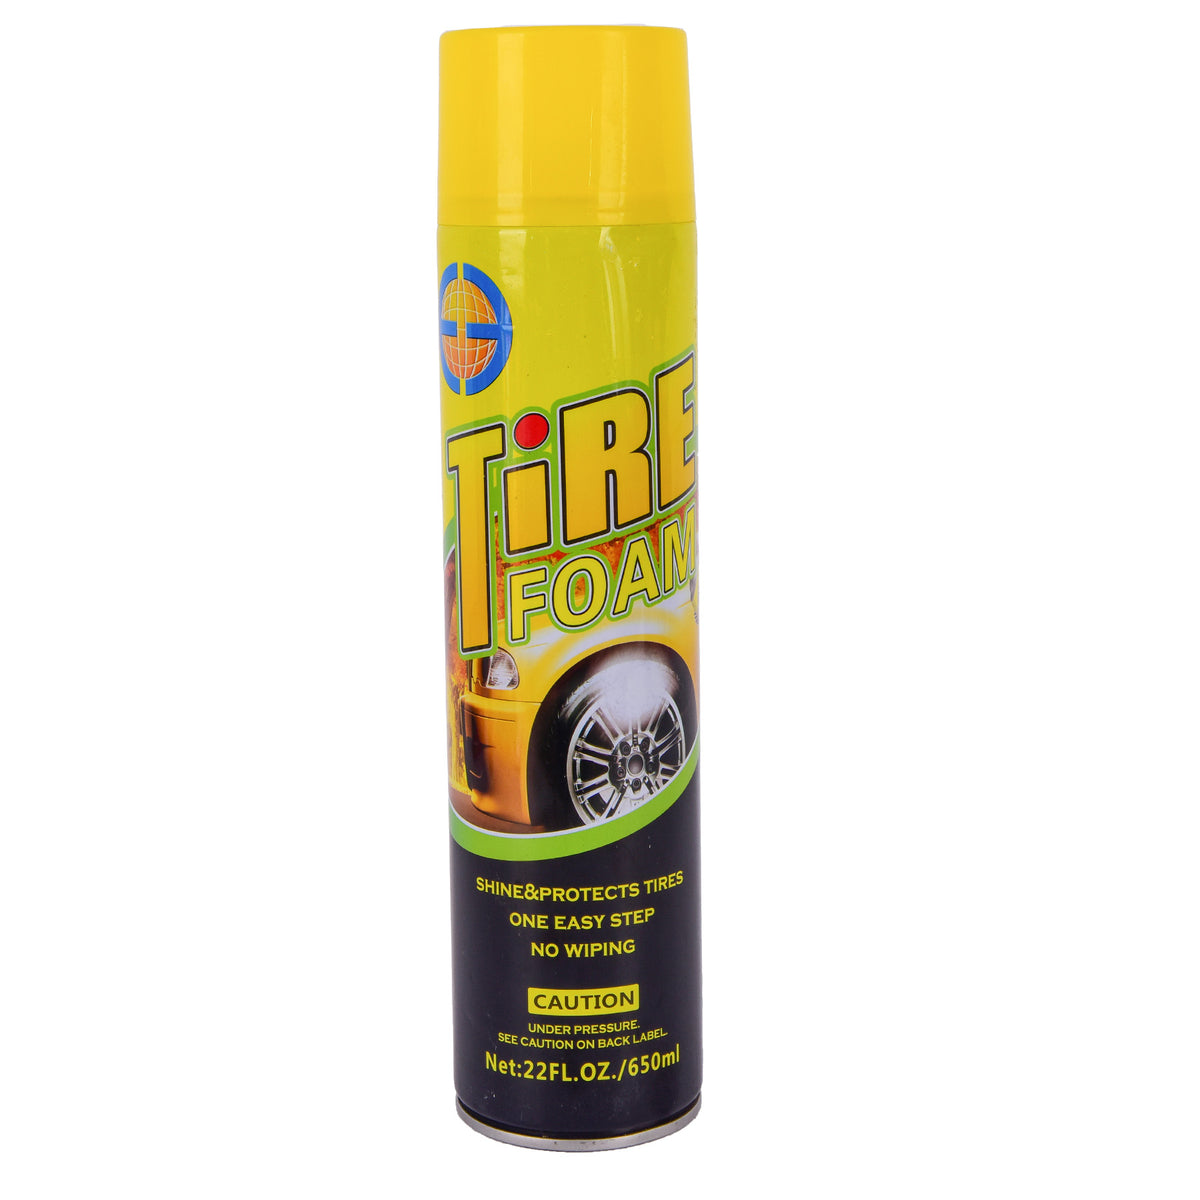 Tire cleaning foamCapacity: 650 ml